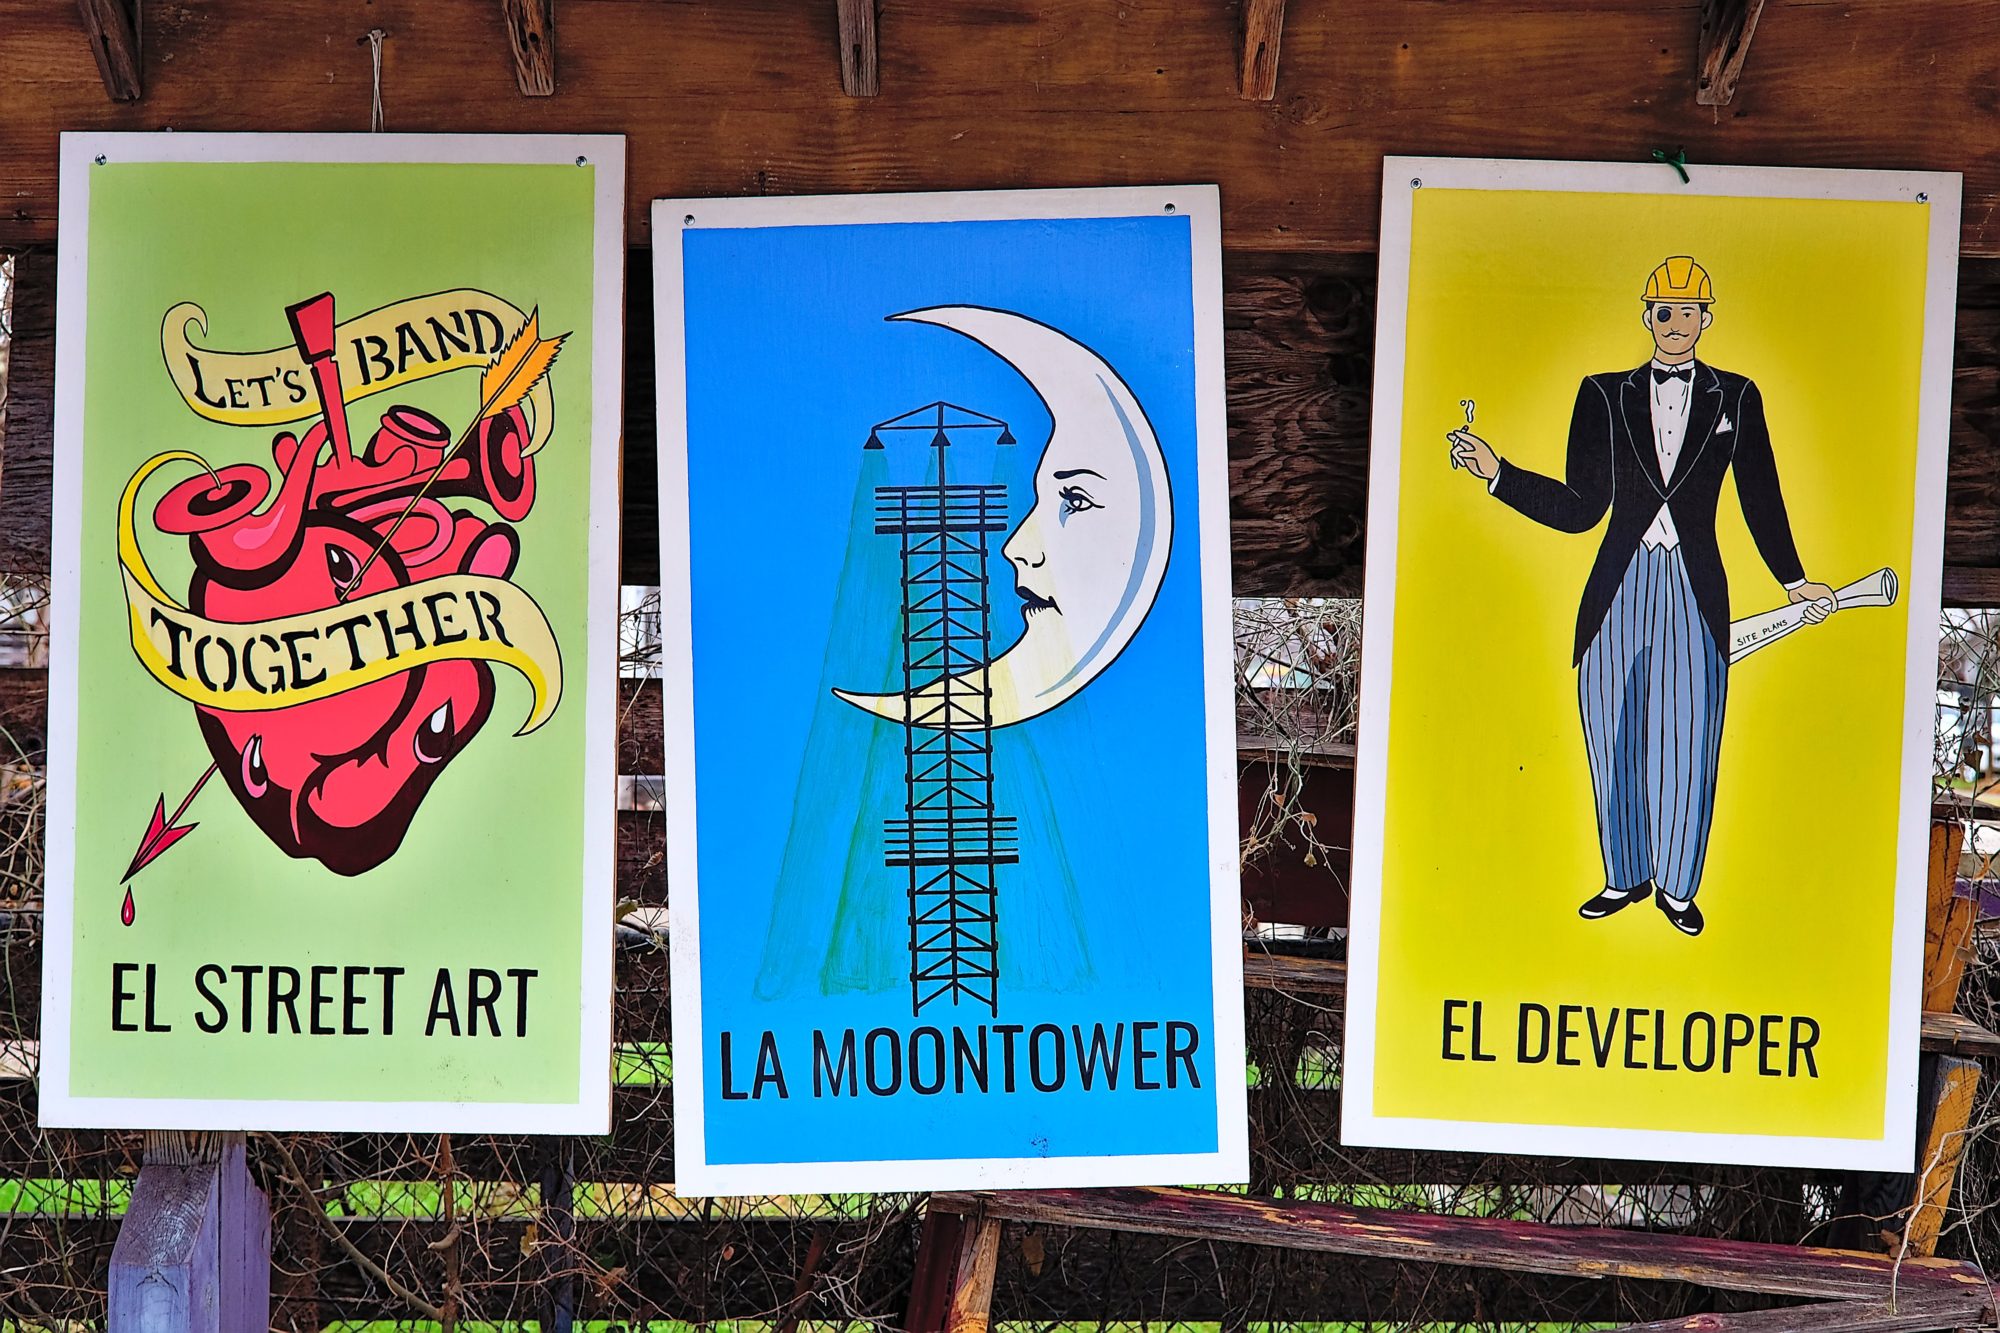 Loteria cards with gentrification images in Austin